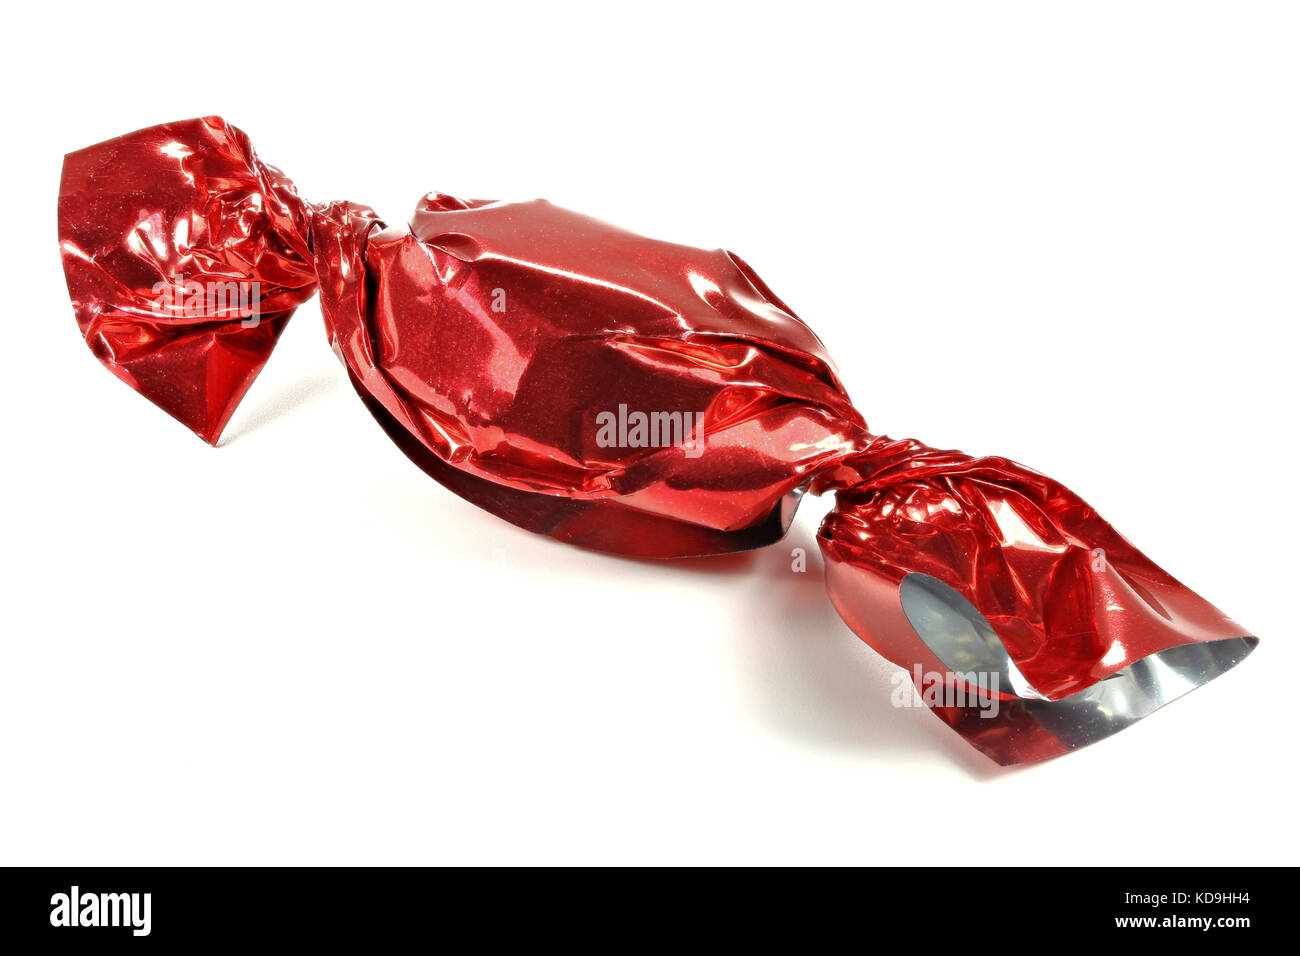 candy in red wrapper isolated on white background Stock Photo